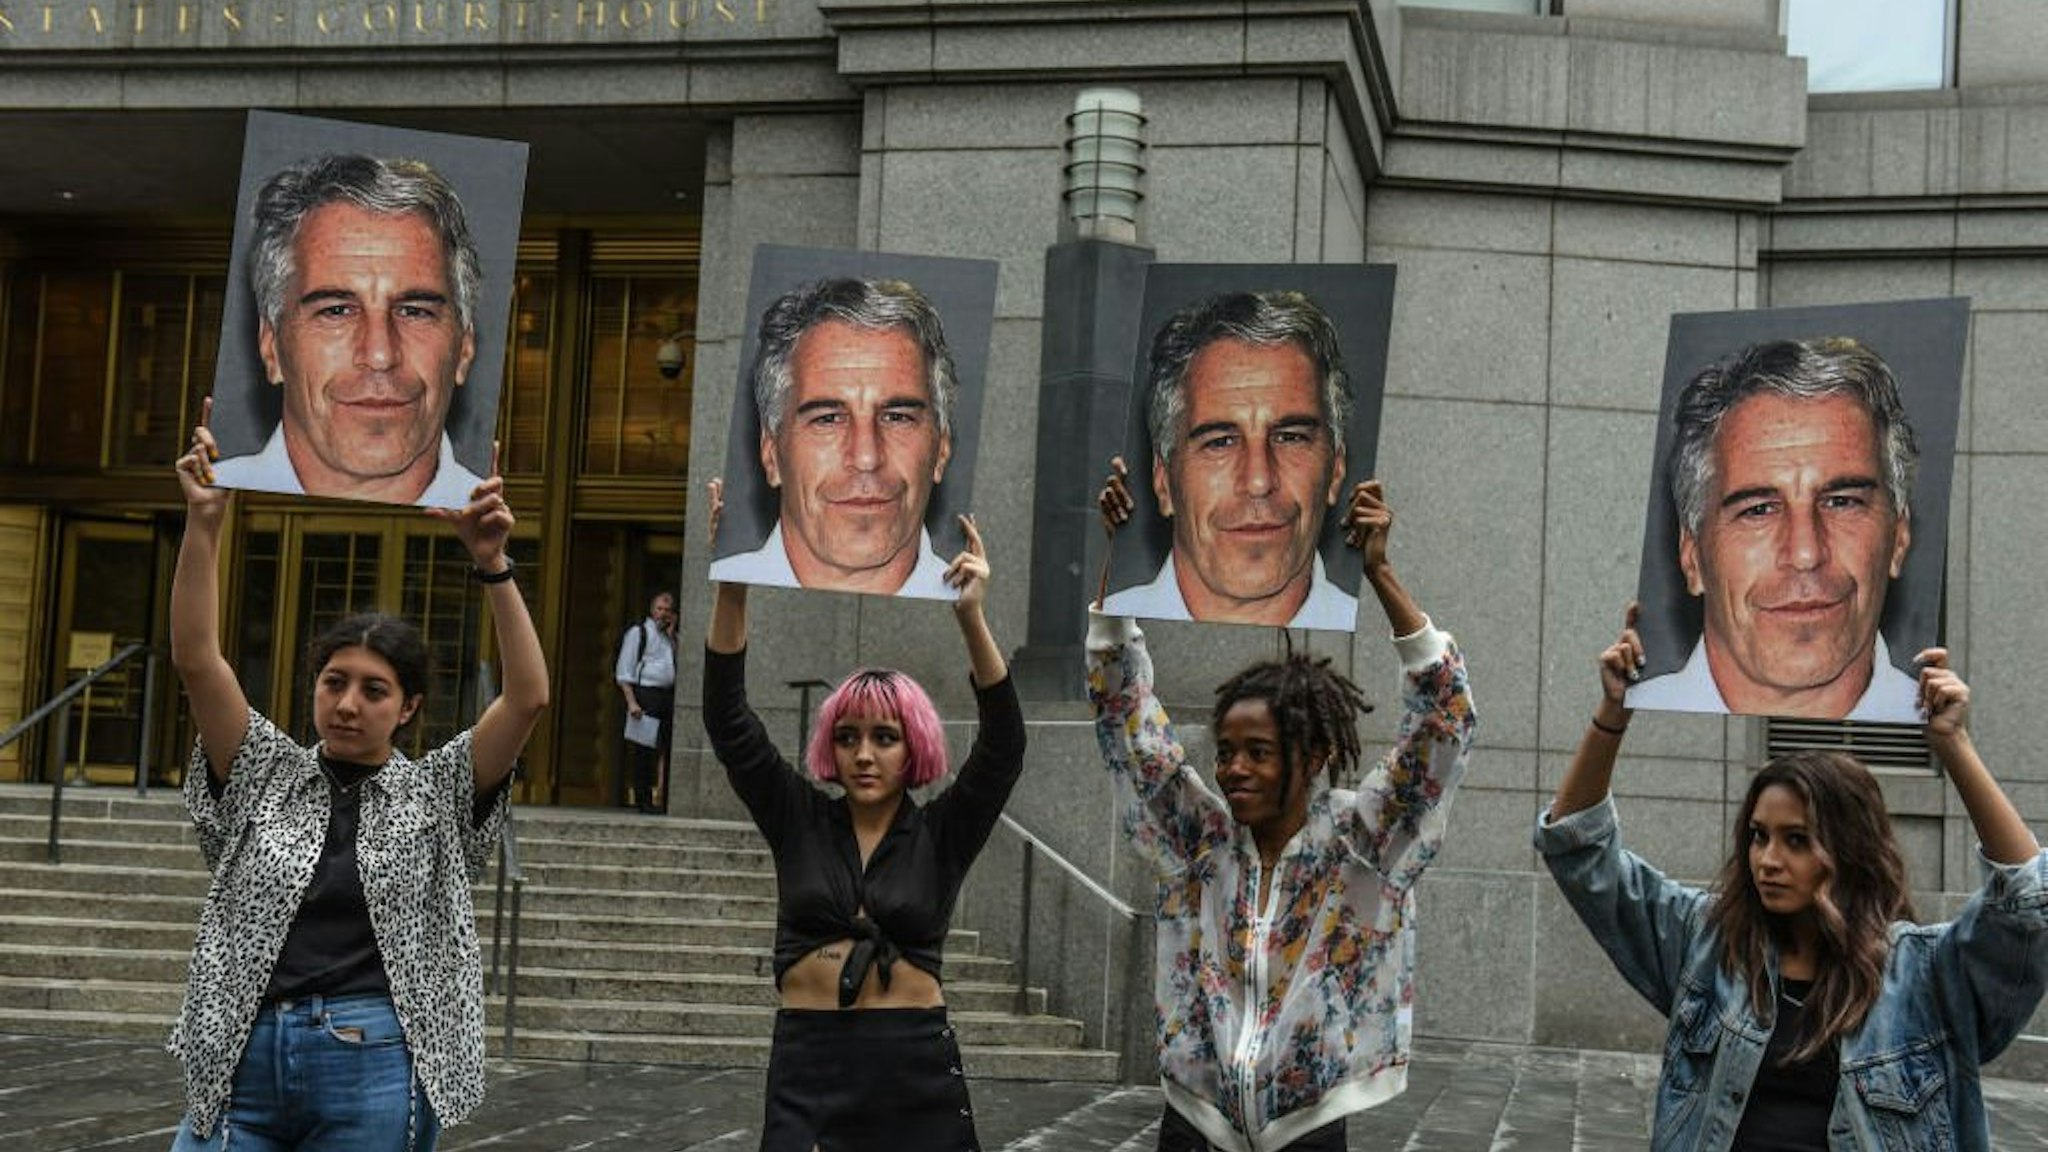 A protest group called "Hot Mess" hold up signs of Jeffrey Epstein in front of the Federal courthouse on July 8, 2019 in New York City.